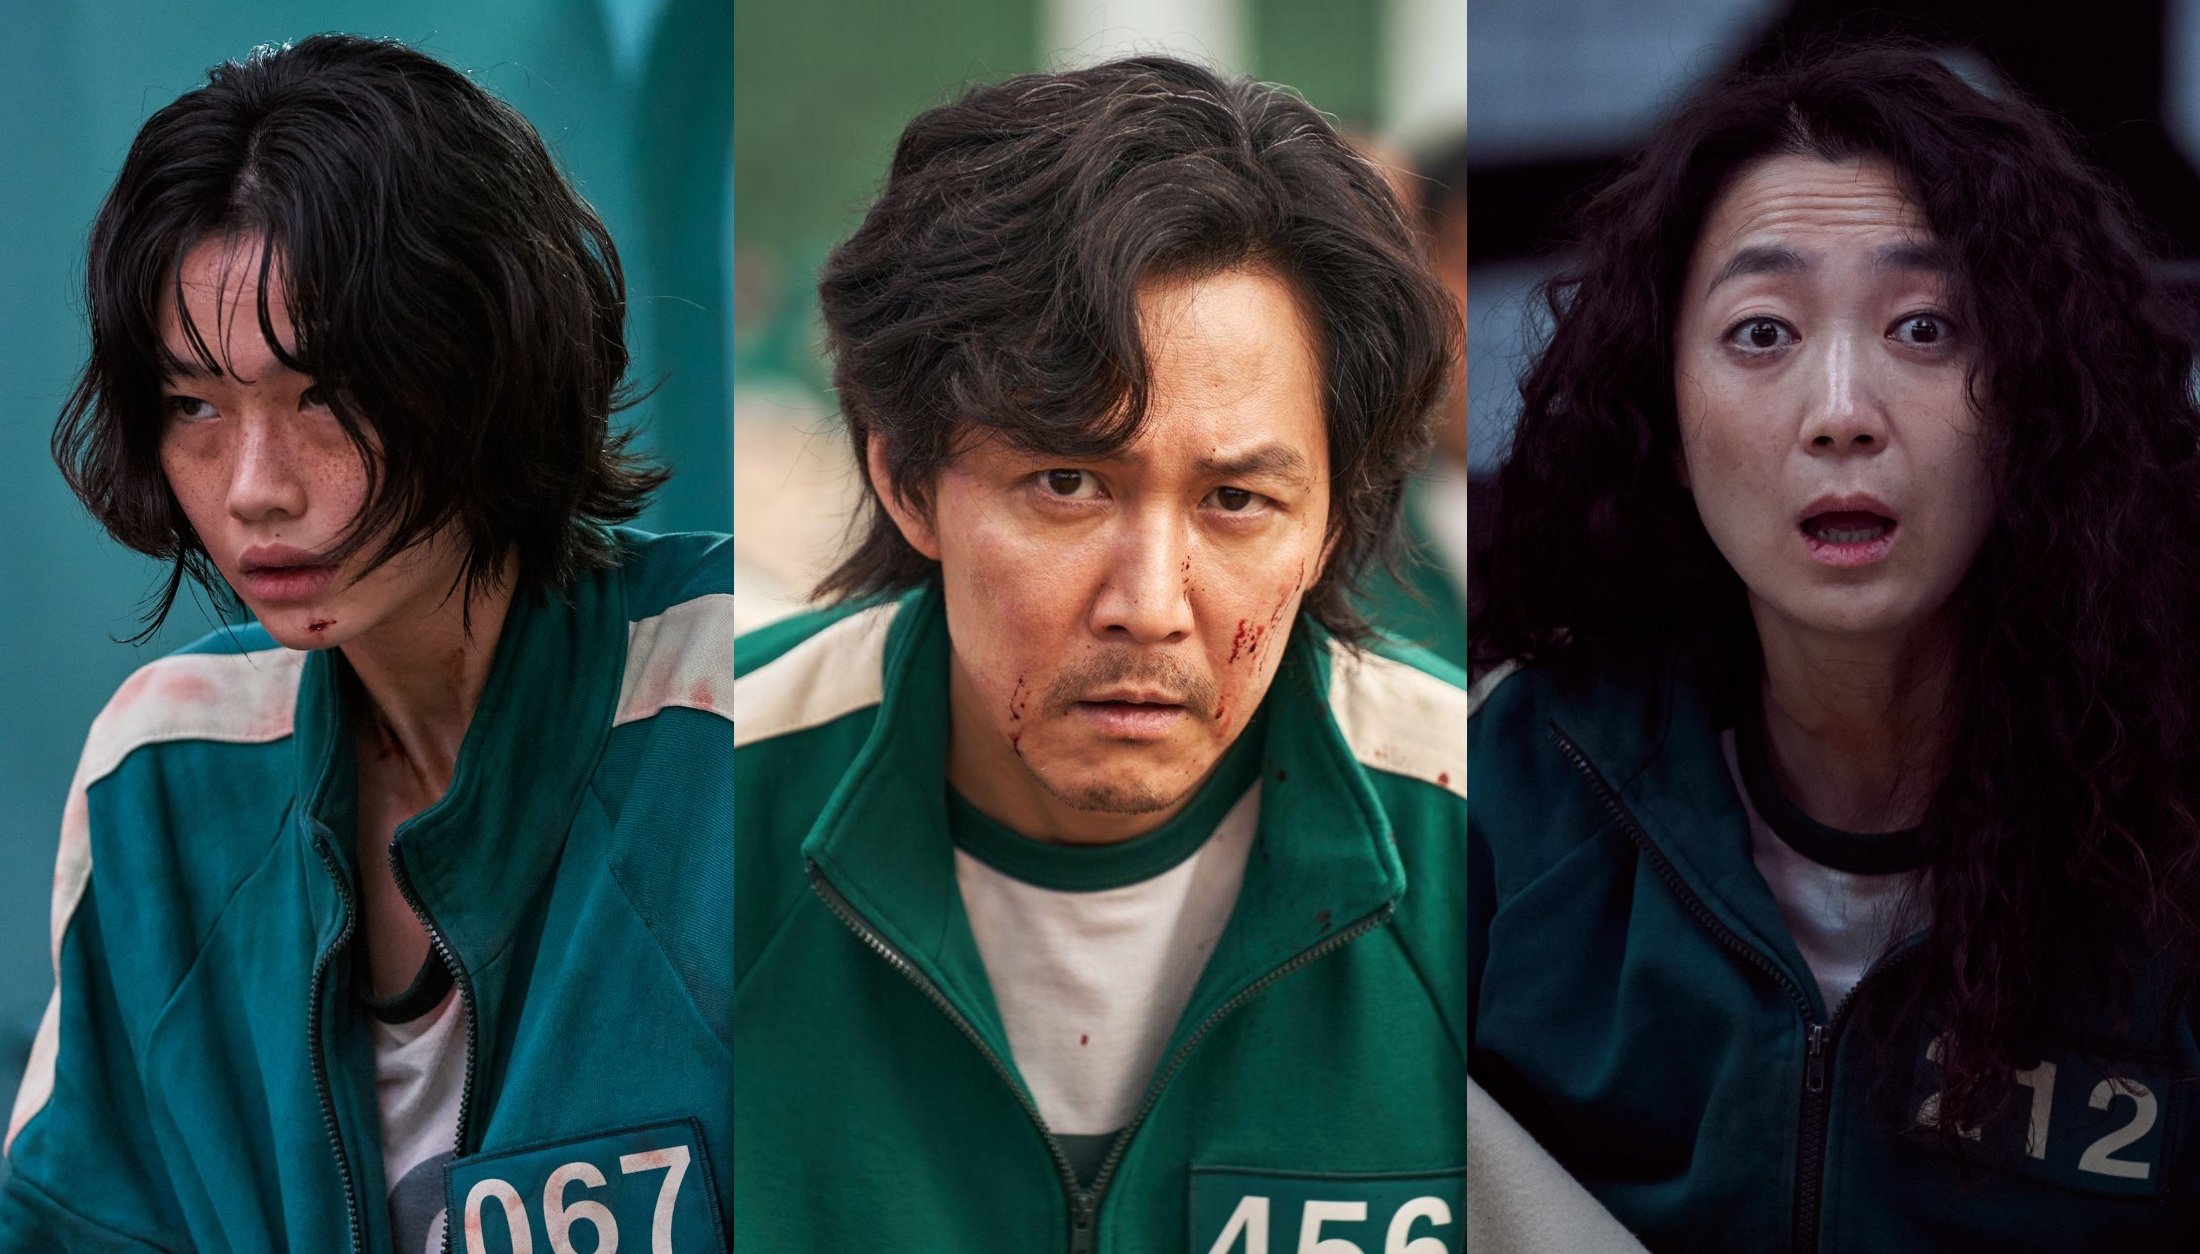 HoYeon Jung, Lee Jung-jae and Kim Joo-ryeong for 'Squid Game' cast wearing green tracksuits